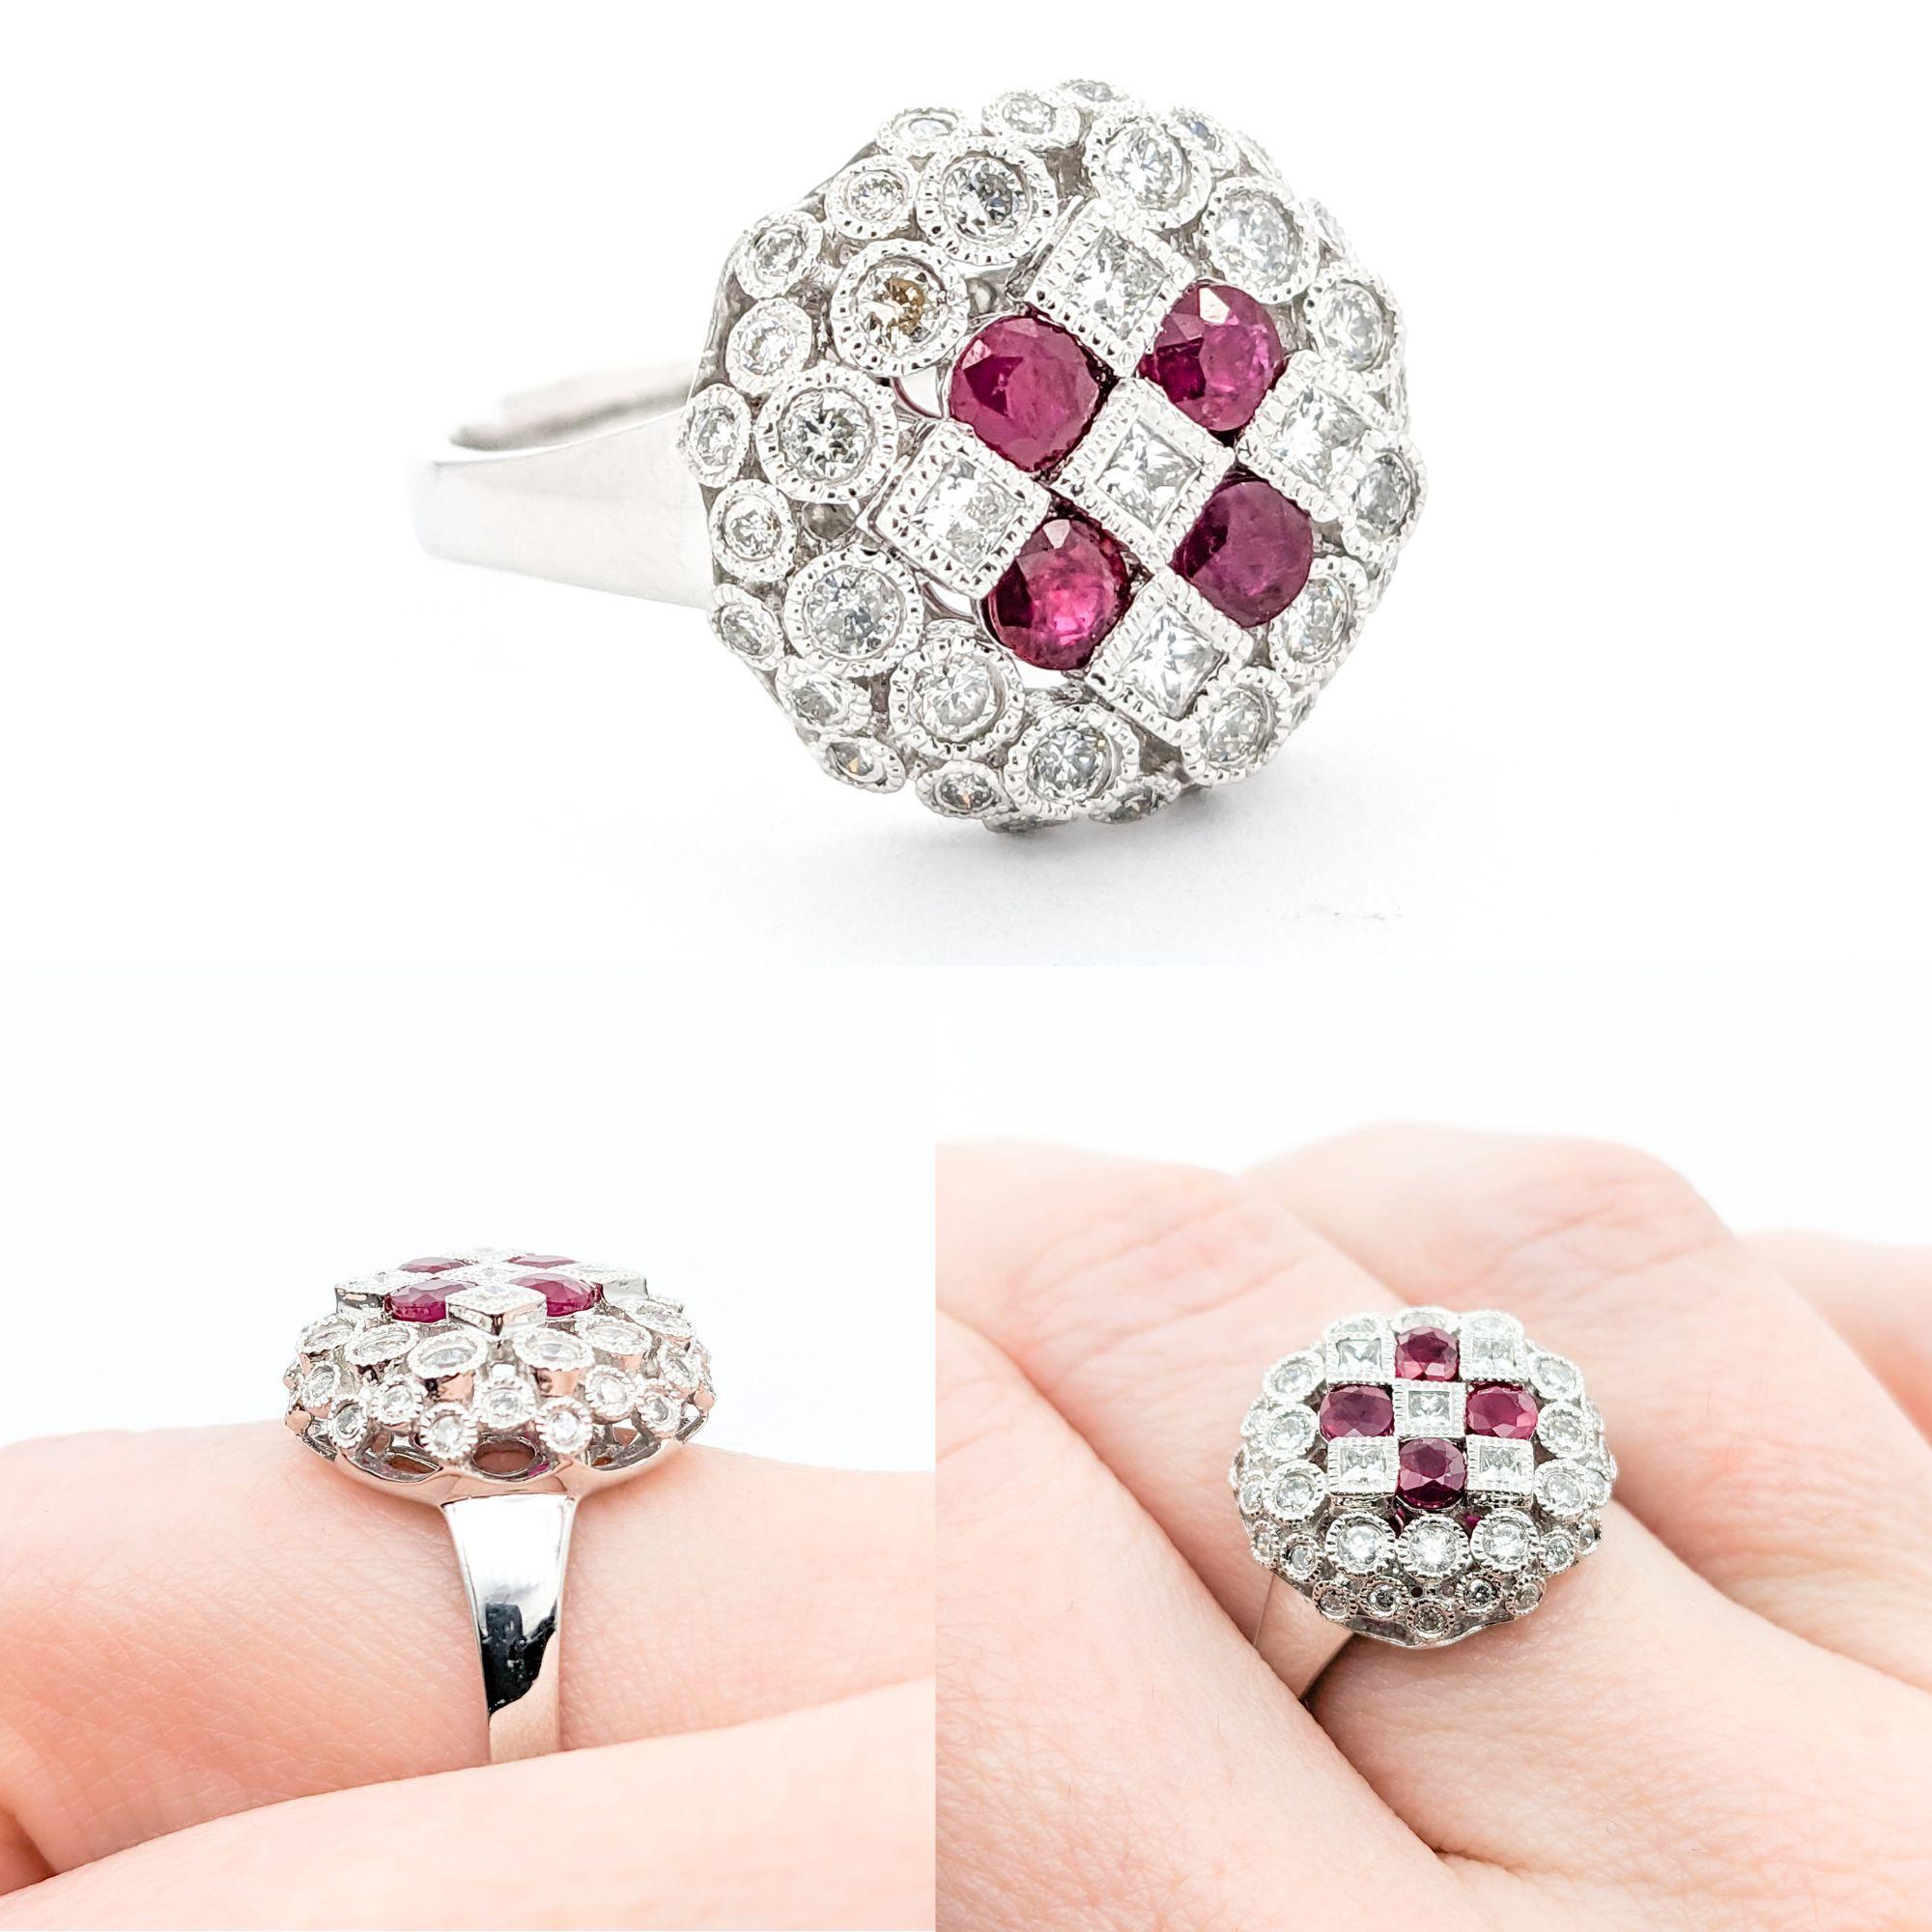 Diamond & Rubies Ring In Platinum

Introducing this lovely Ruby and Diamond Ring, beautifully crafted in platinum. This statement ring features a stunning centerpiece of Rubies totaling .66ctw. The Rubies are beautifully complemented by .70ctw of